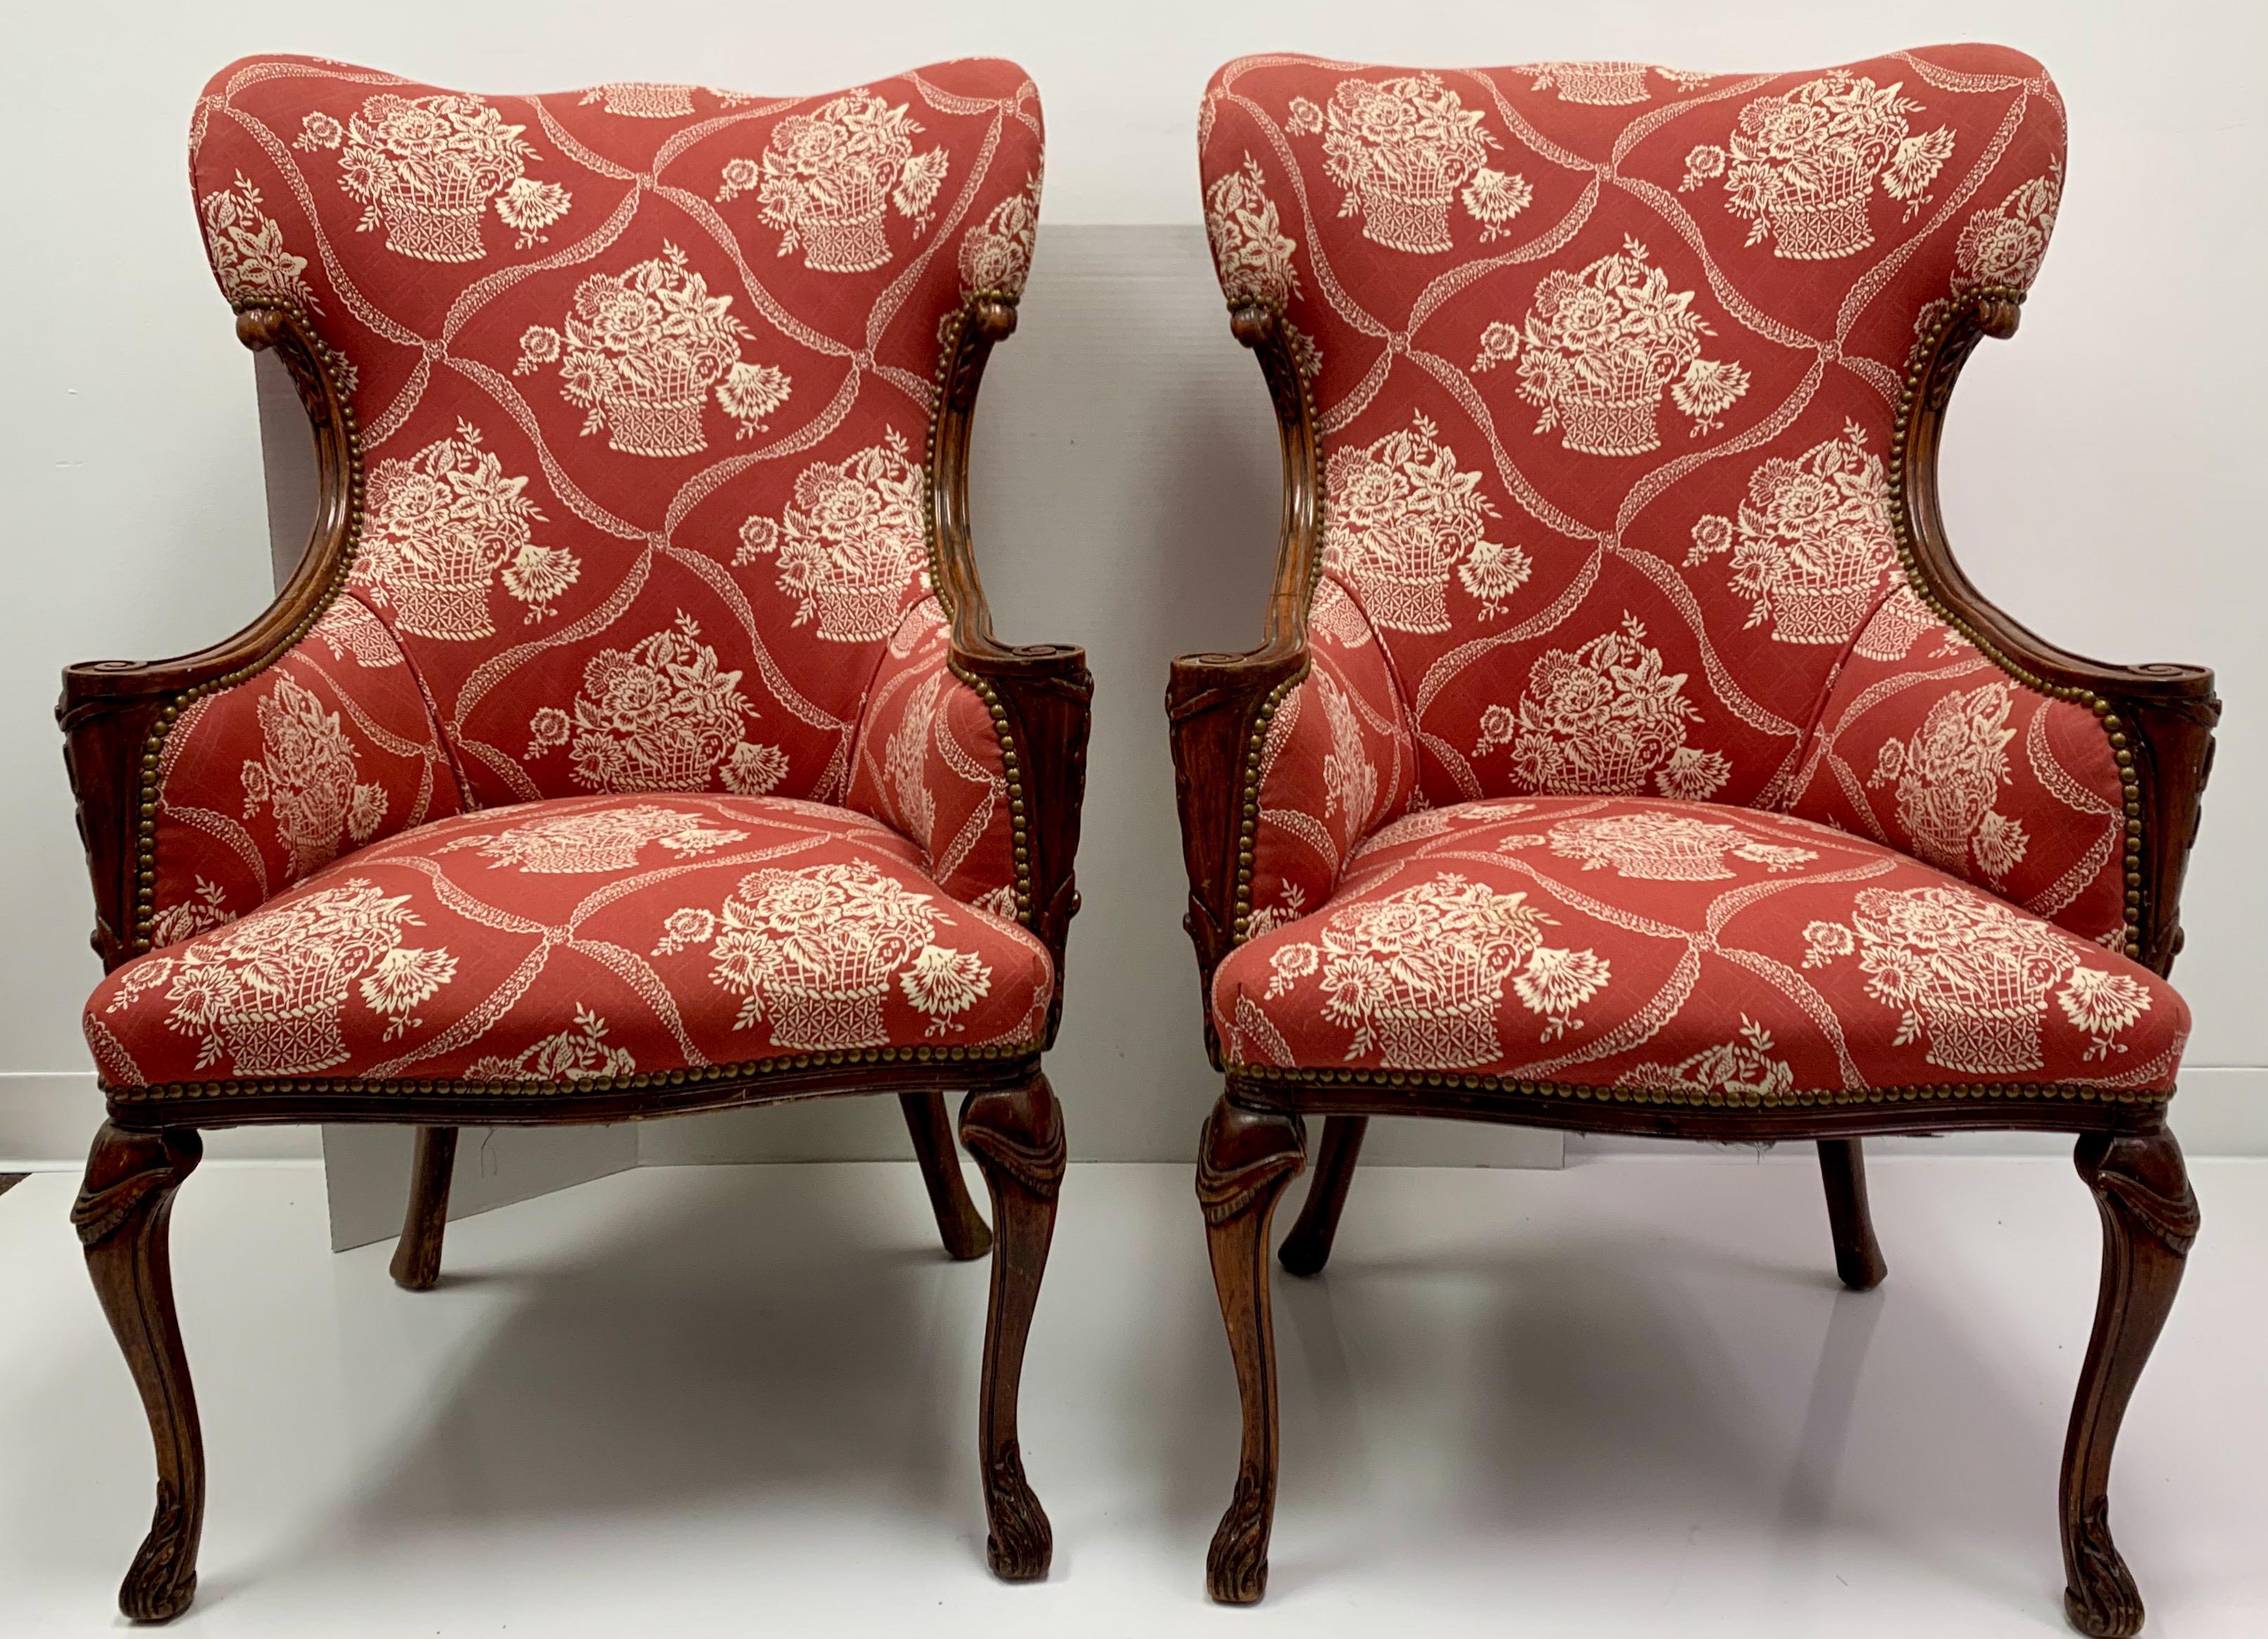 20th Century Antique French Carved Mahogany Wing Chairs in Schumacher Fabric, Pair For Sale